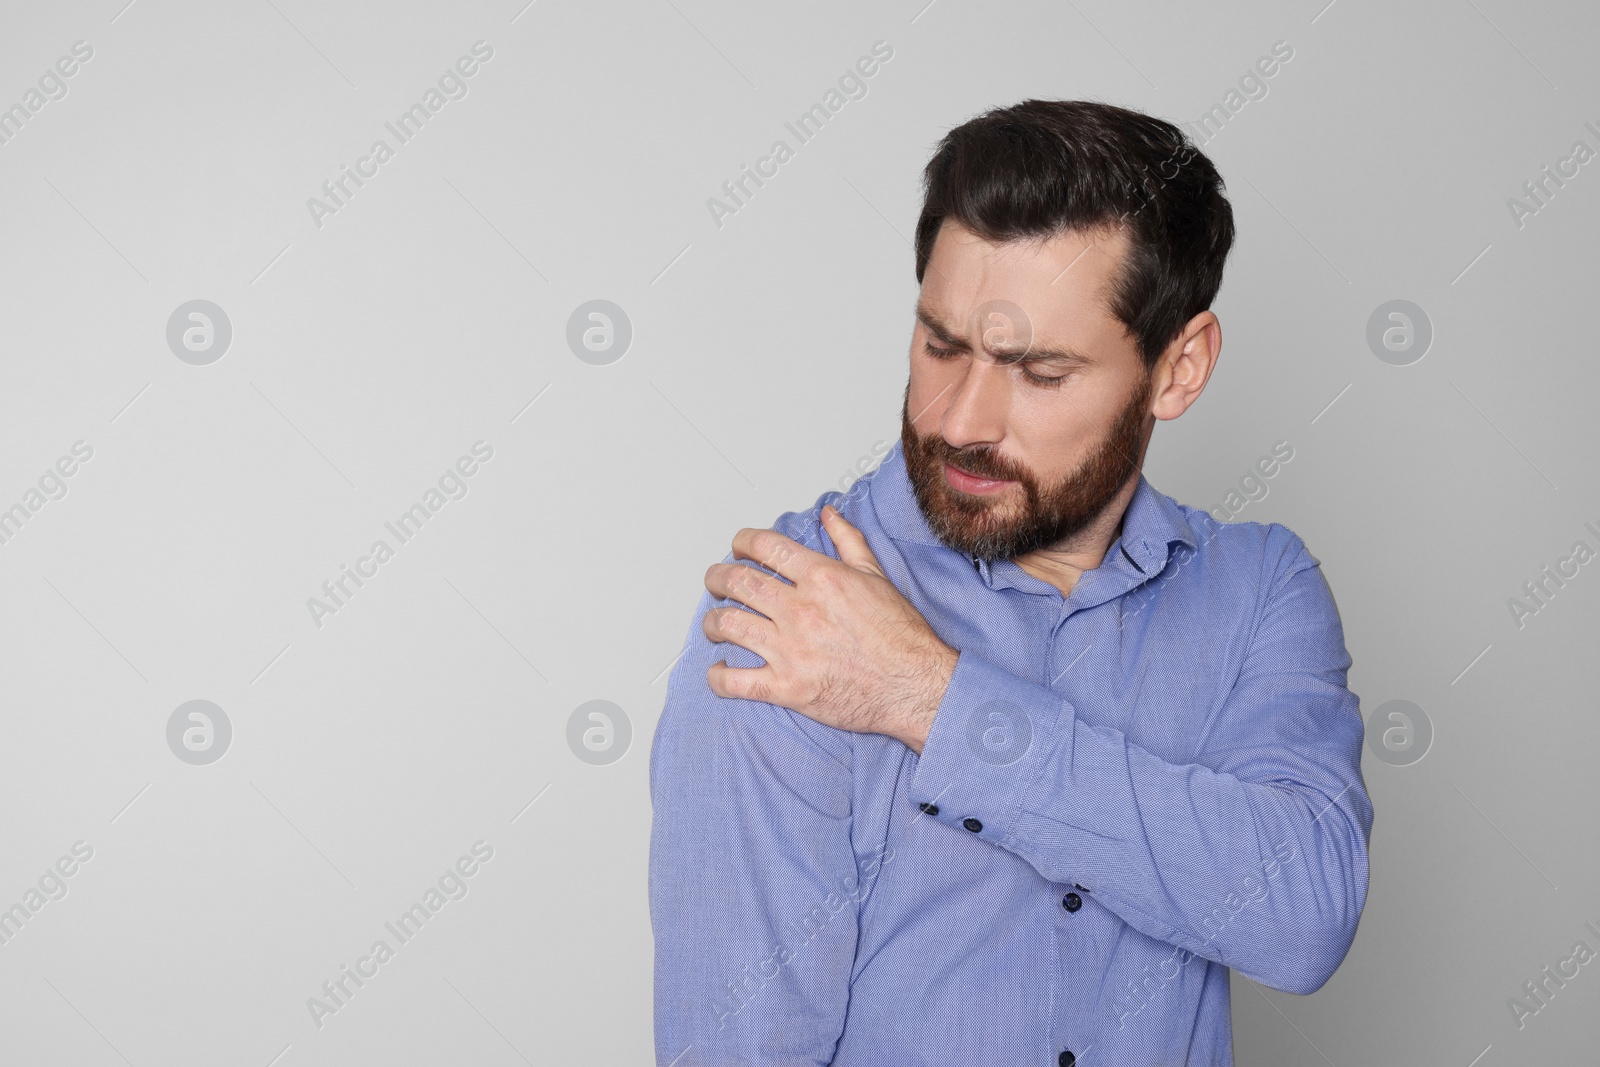 Photo of Man suffering from pain in his shoulder on light background, space for text. Arthritis symptoms